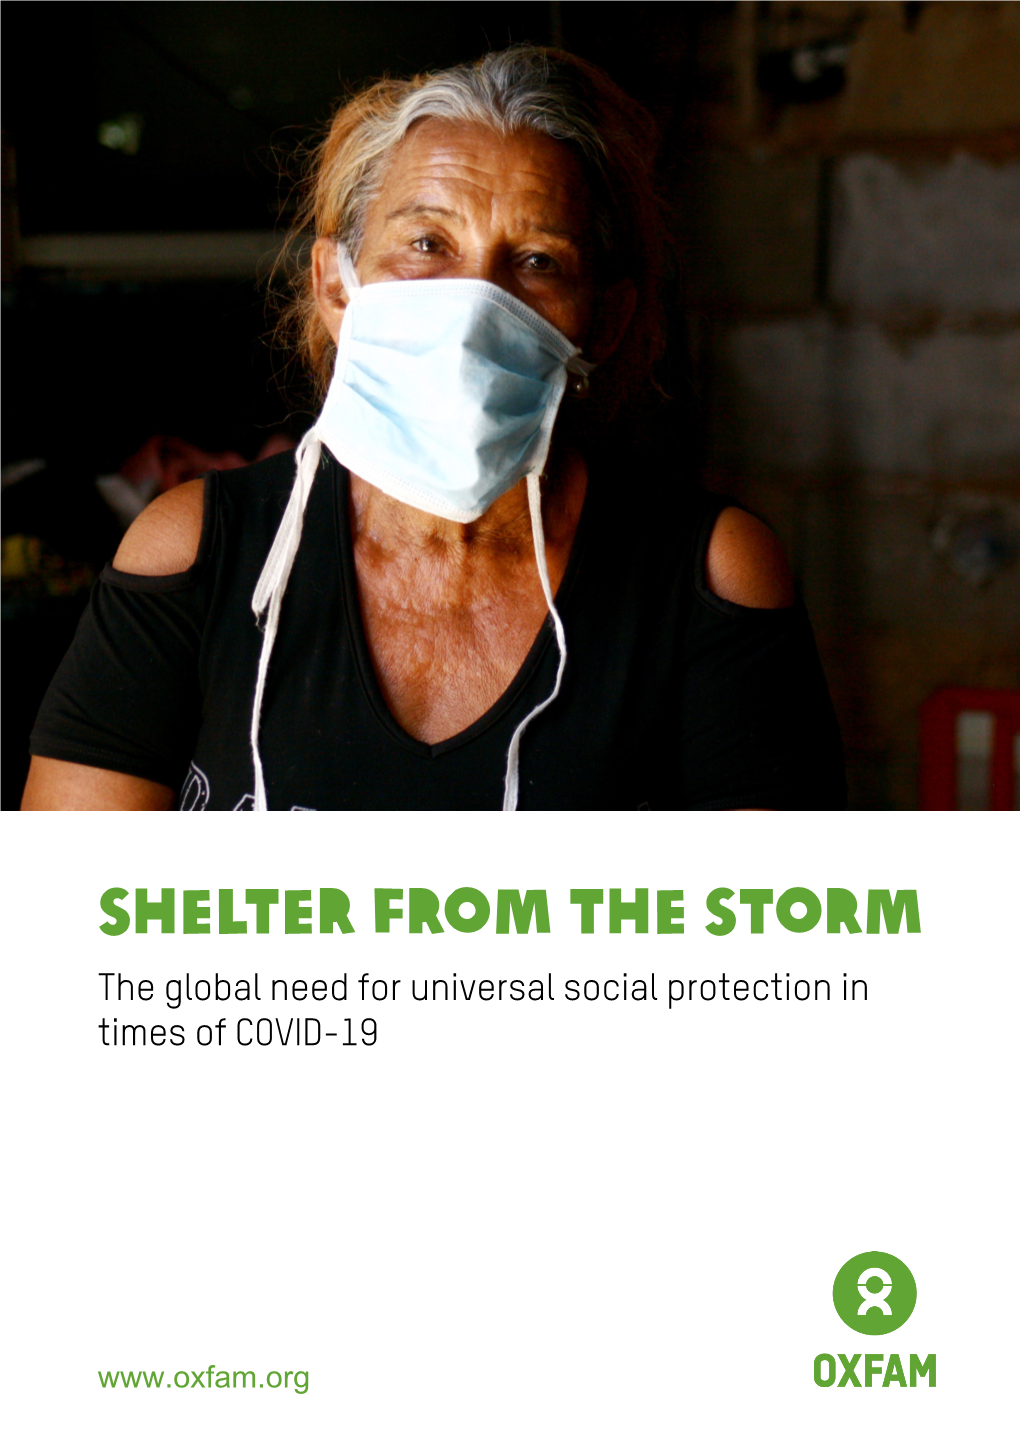 The Global Need for Universal Social Protection in Times of COVID-19